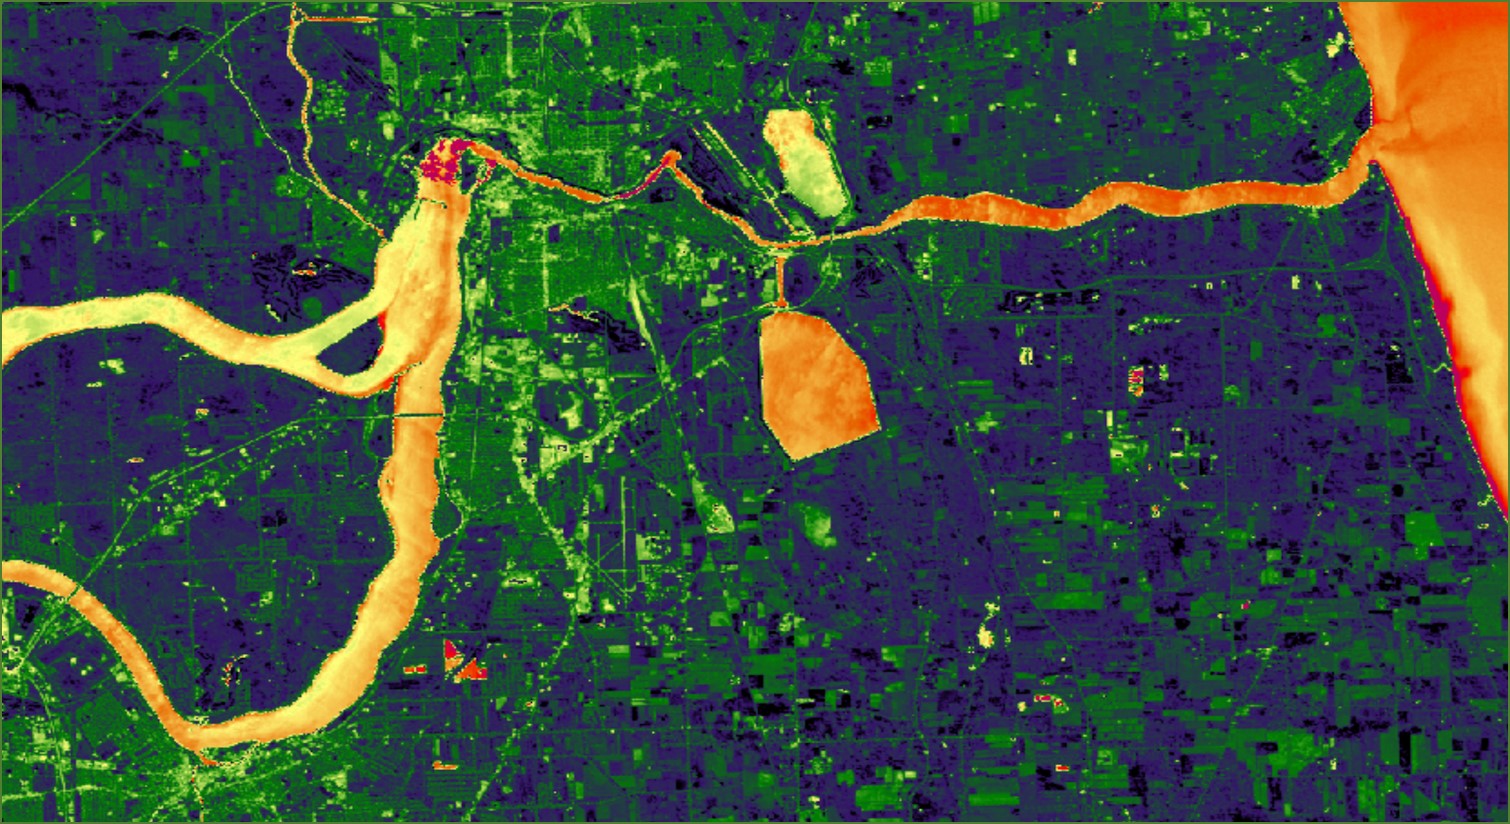 This is a processed image that shows the average of the Normalized Difference Water Index (NDWI) and the Modified NDWI (MNDWI) derived from June 1, 2017 Landsat 8 OLI data, with yellow and orange colors representing higher wetness relative to the dryer dark blue and green colors. The image shows the southern coast of Lake Ontario, centered on the city of Niagara Falls, New York, and indicates areas inundated by water.